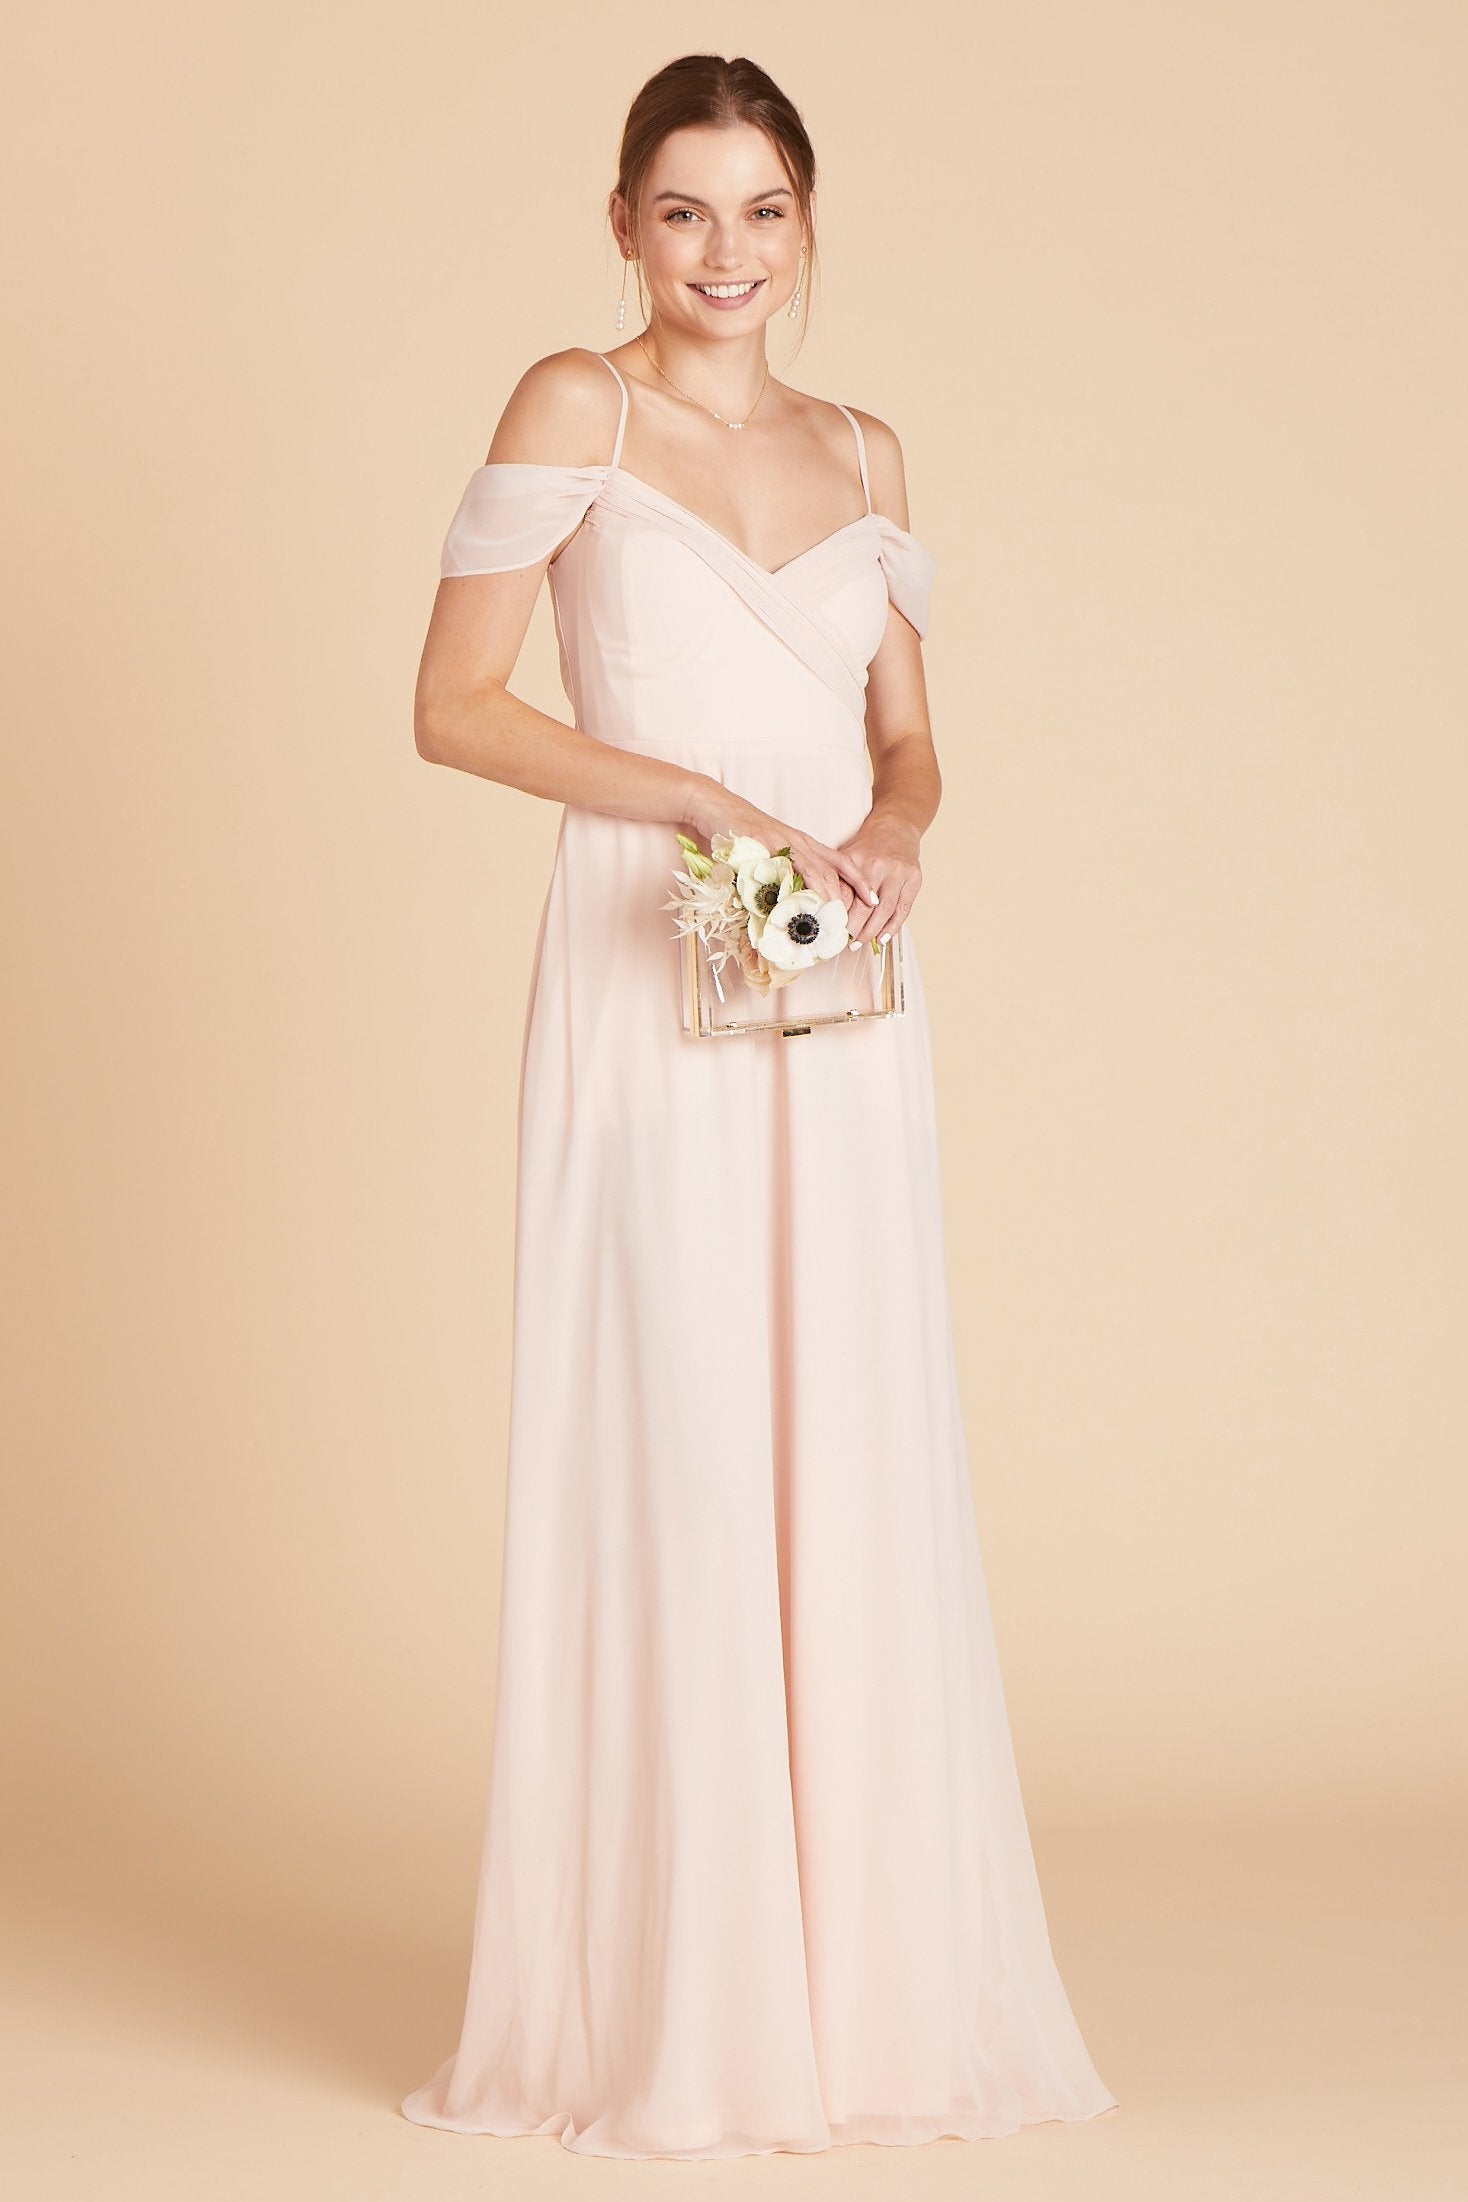 Spence convertible bridesmaid dress in pale blush chiffon by Birdy Grey, front view